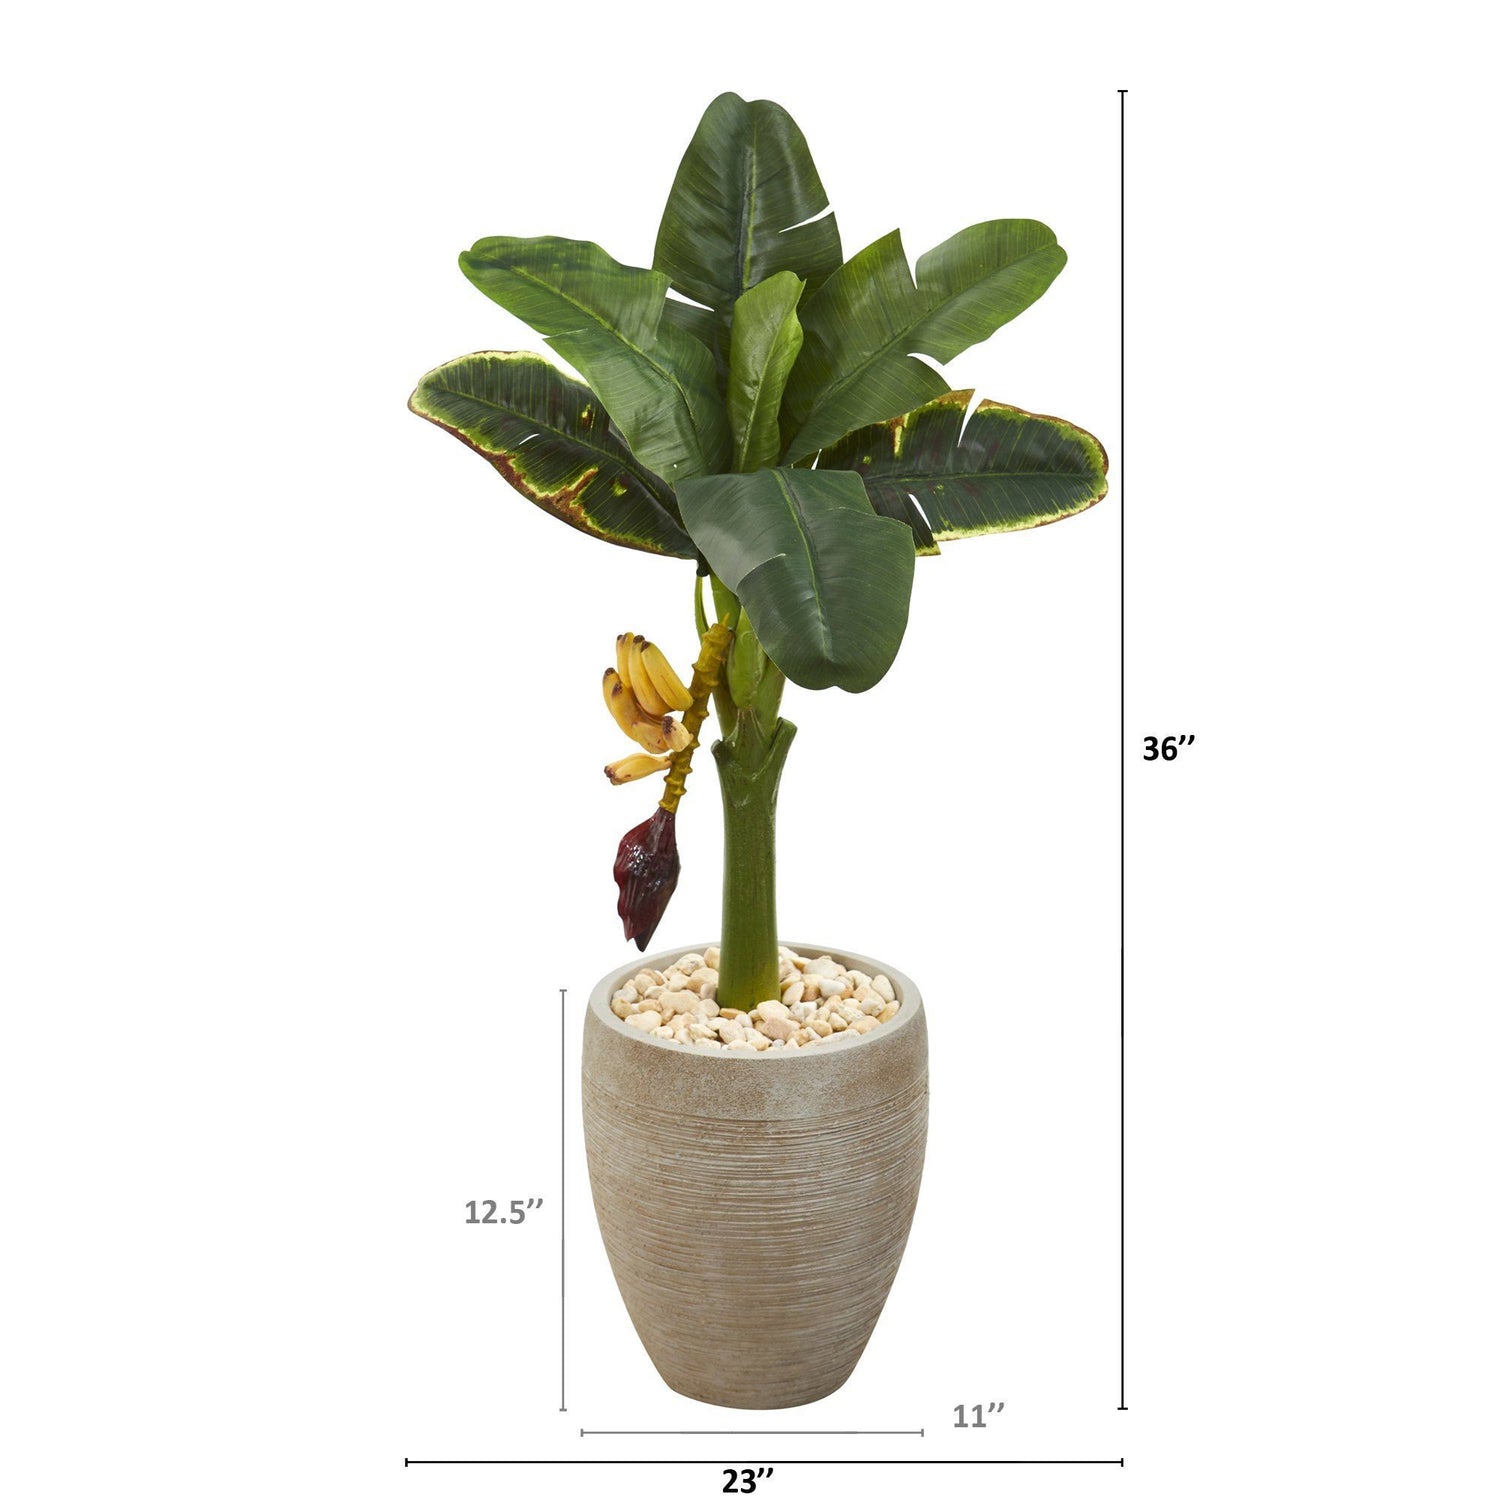 36” Banana Artificial Tree in Sand Colored Planter